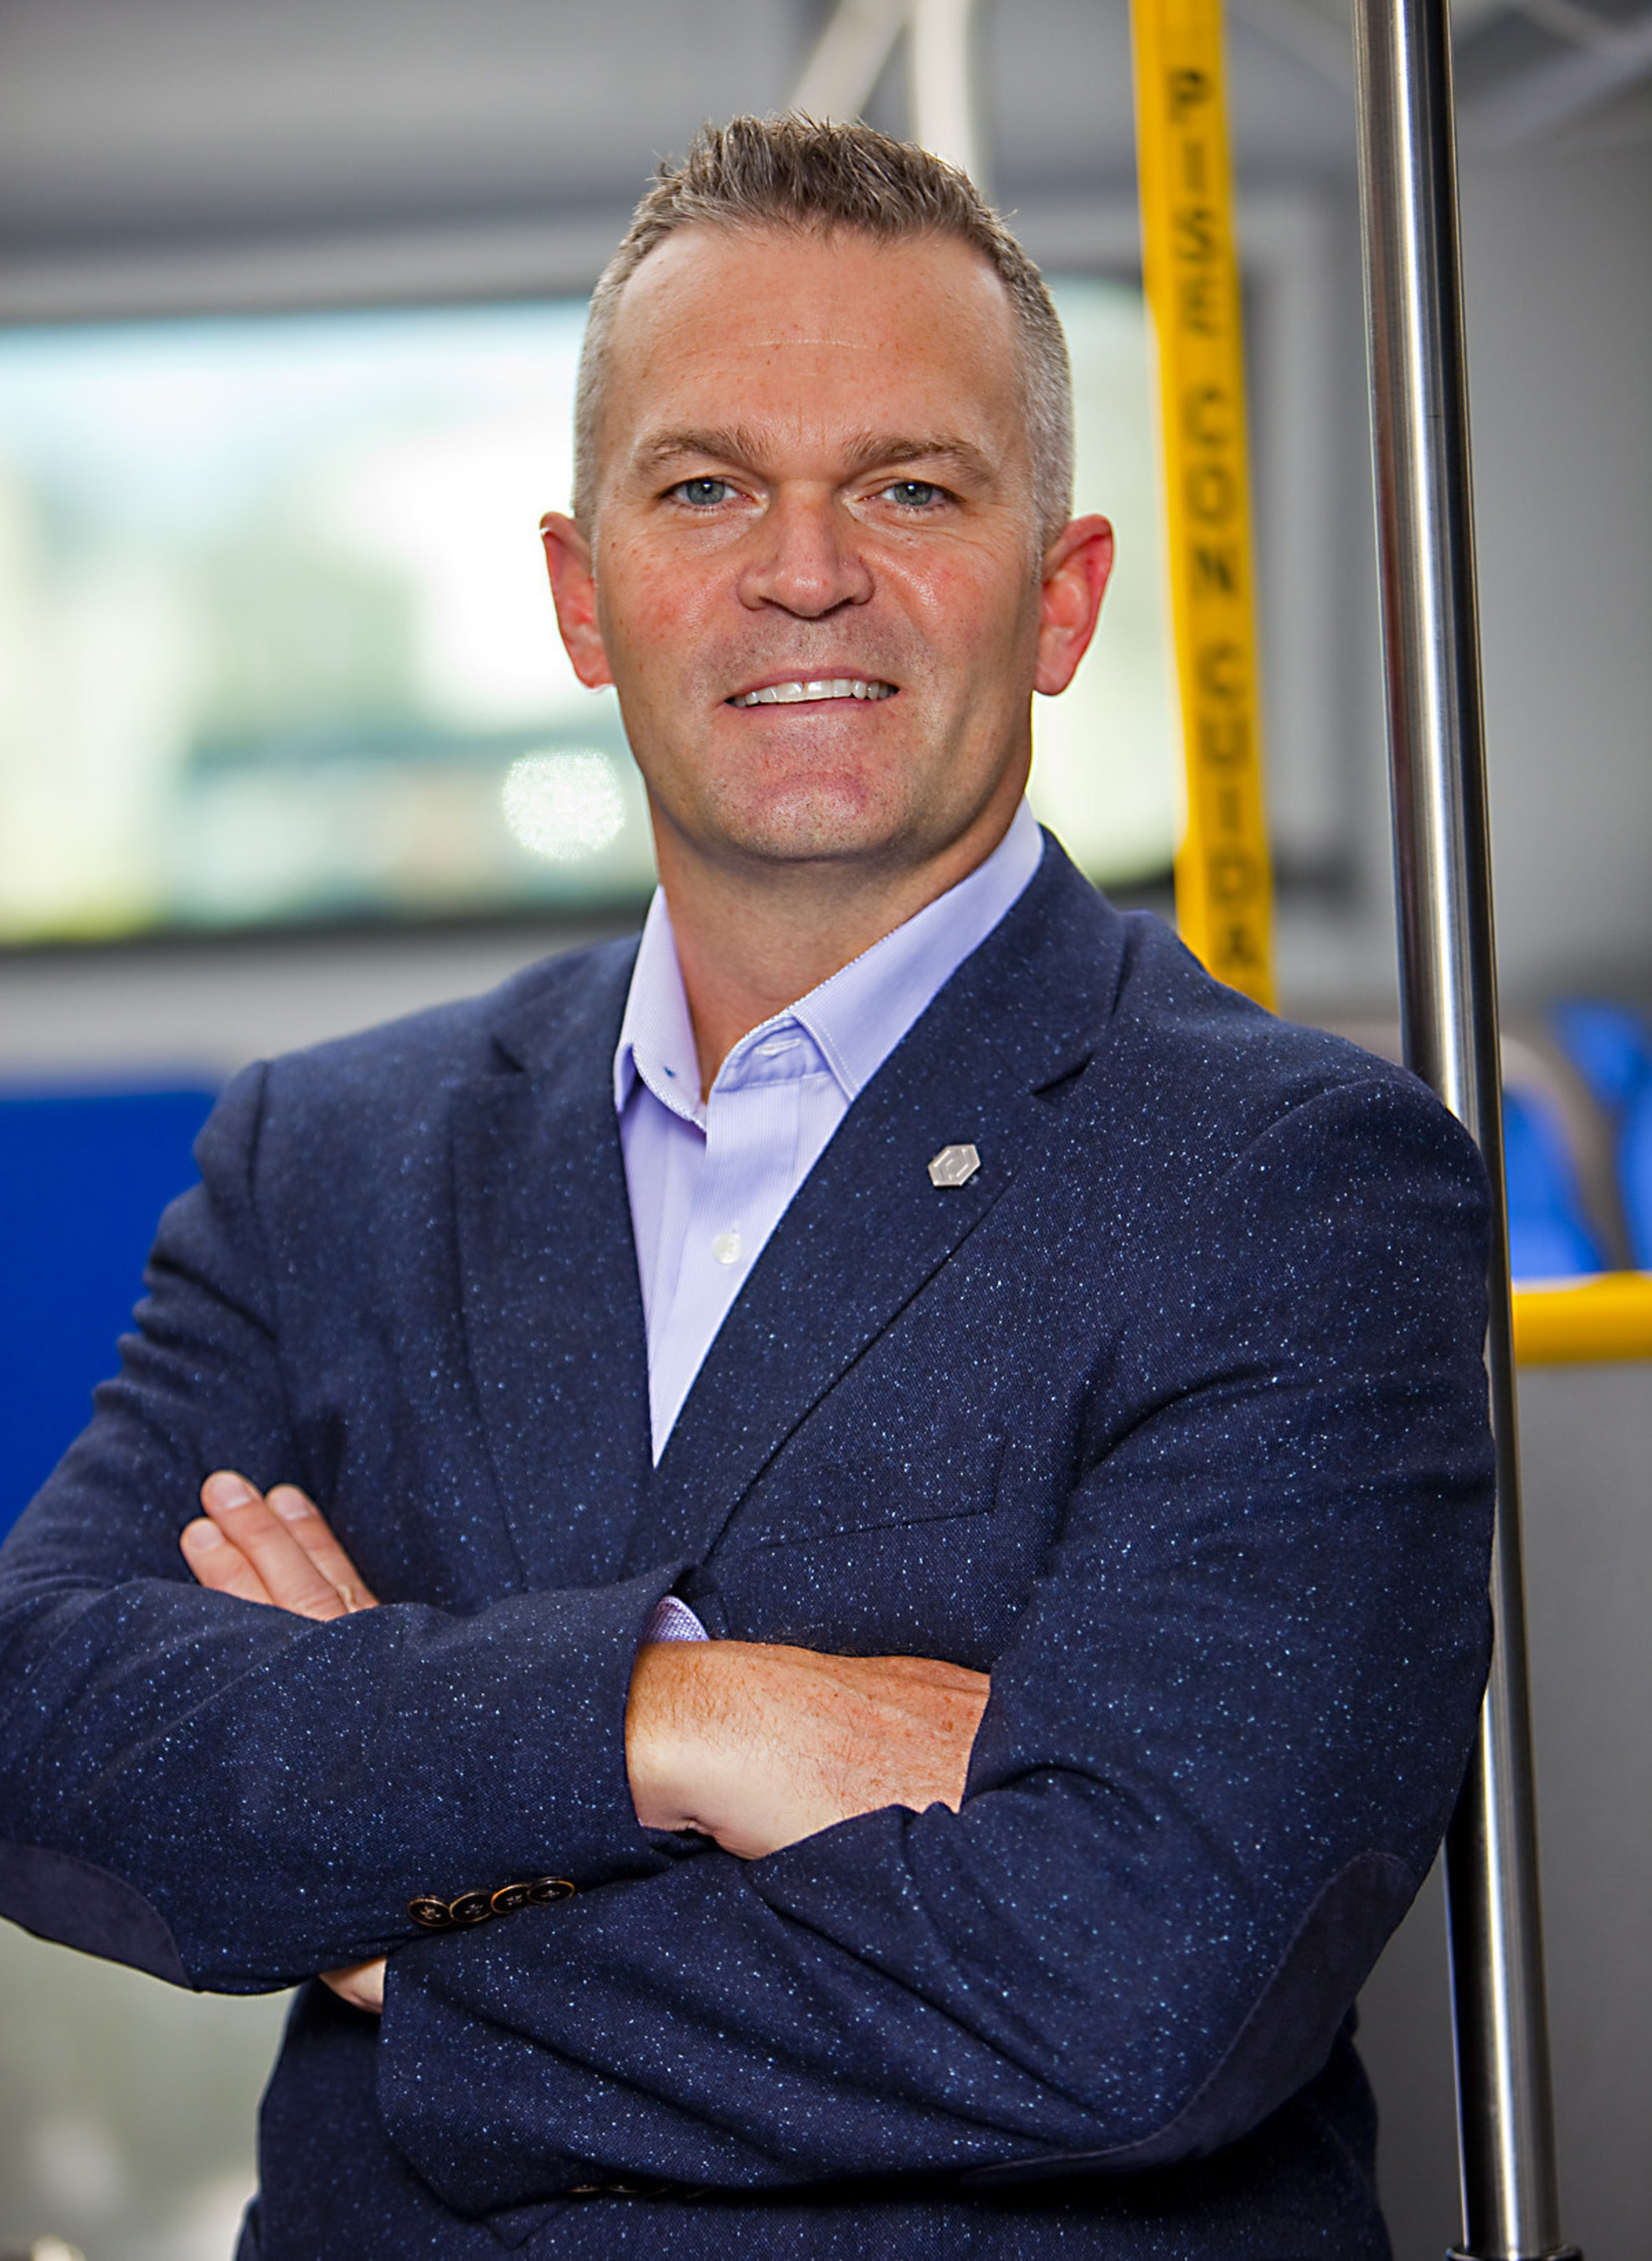 Tesla and Honeywell veteran, Josh Ensign, has been appointed COO of battery-electric transit vehicle company, Proterra, Inc.